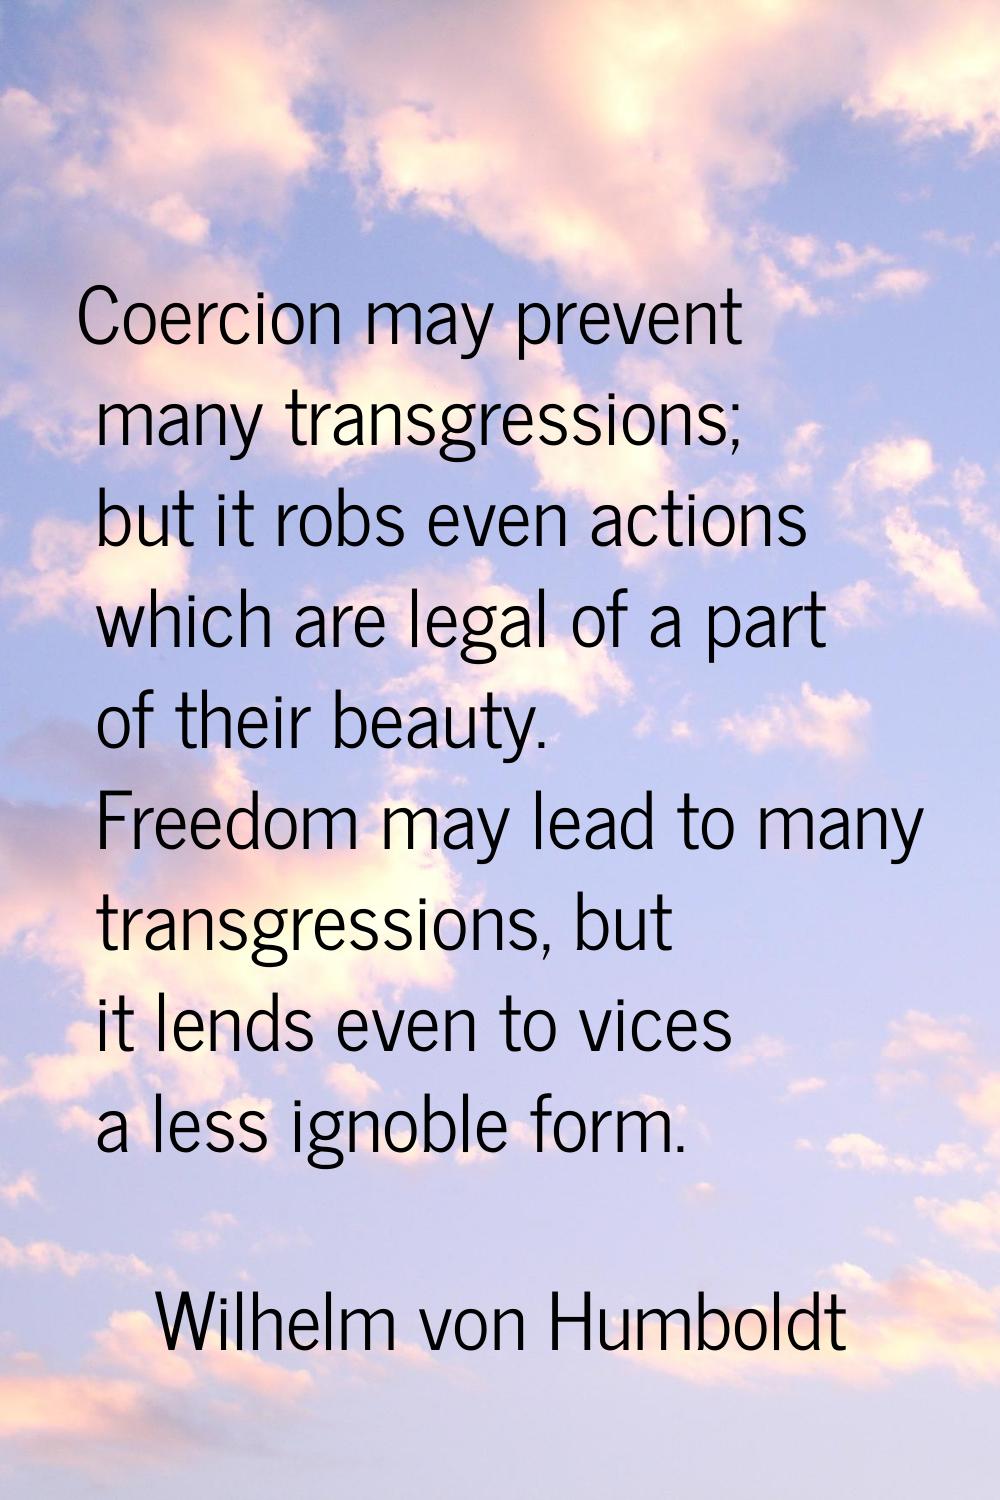 Coercion may prevent many transgressions; but it robs even actions which are legal of a part of the